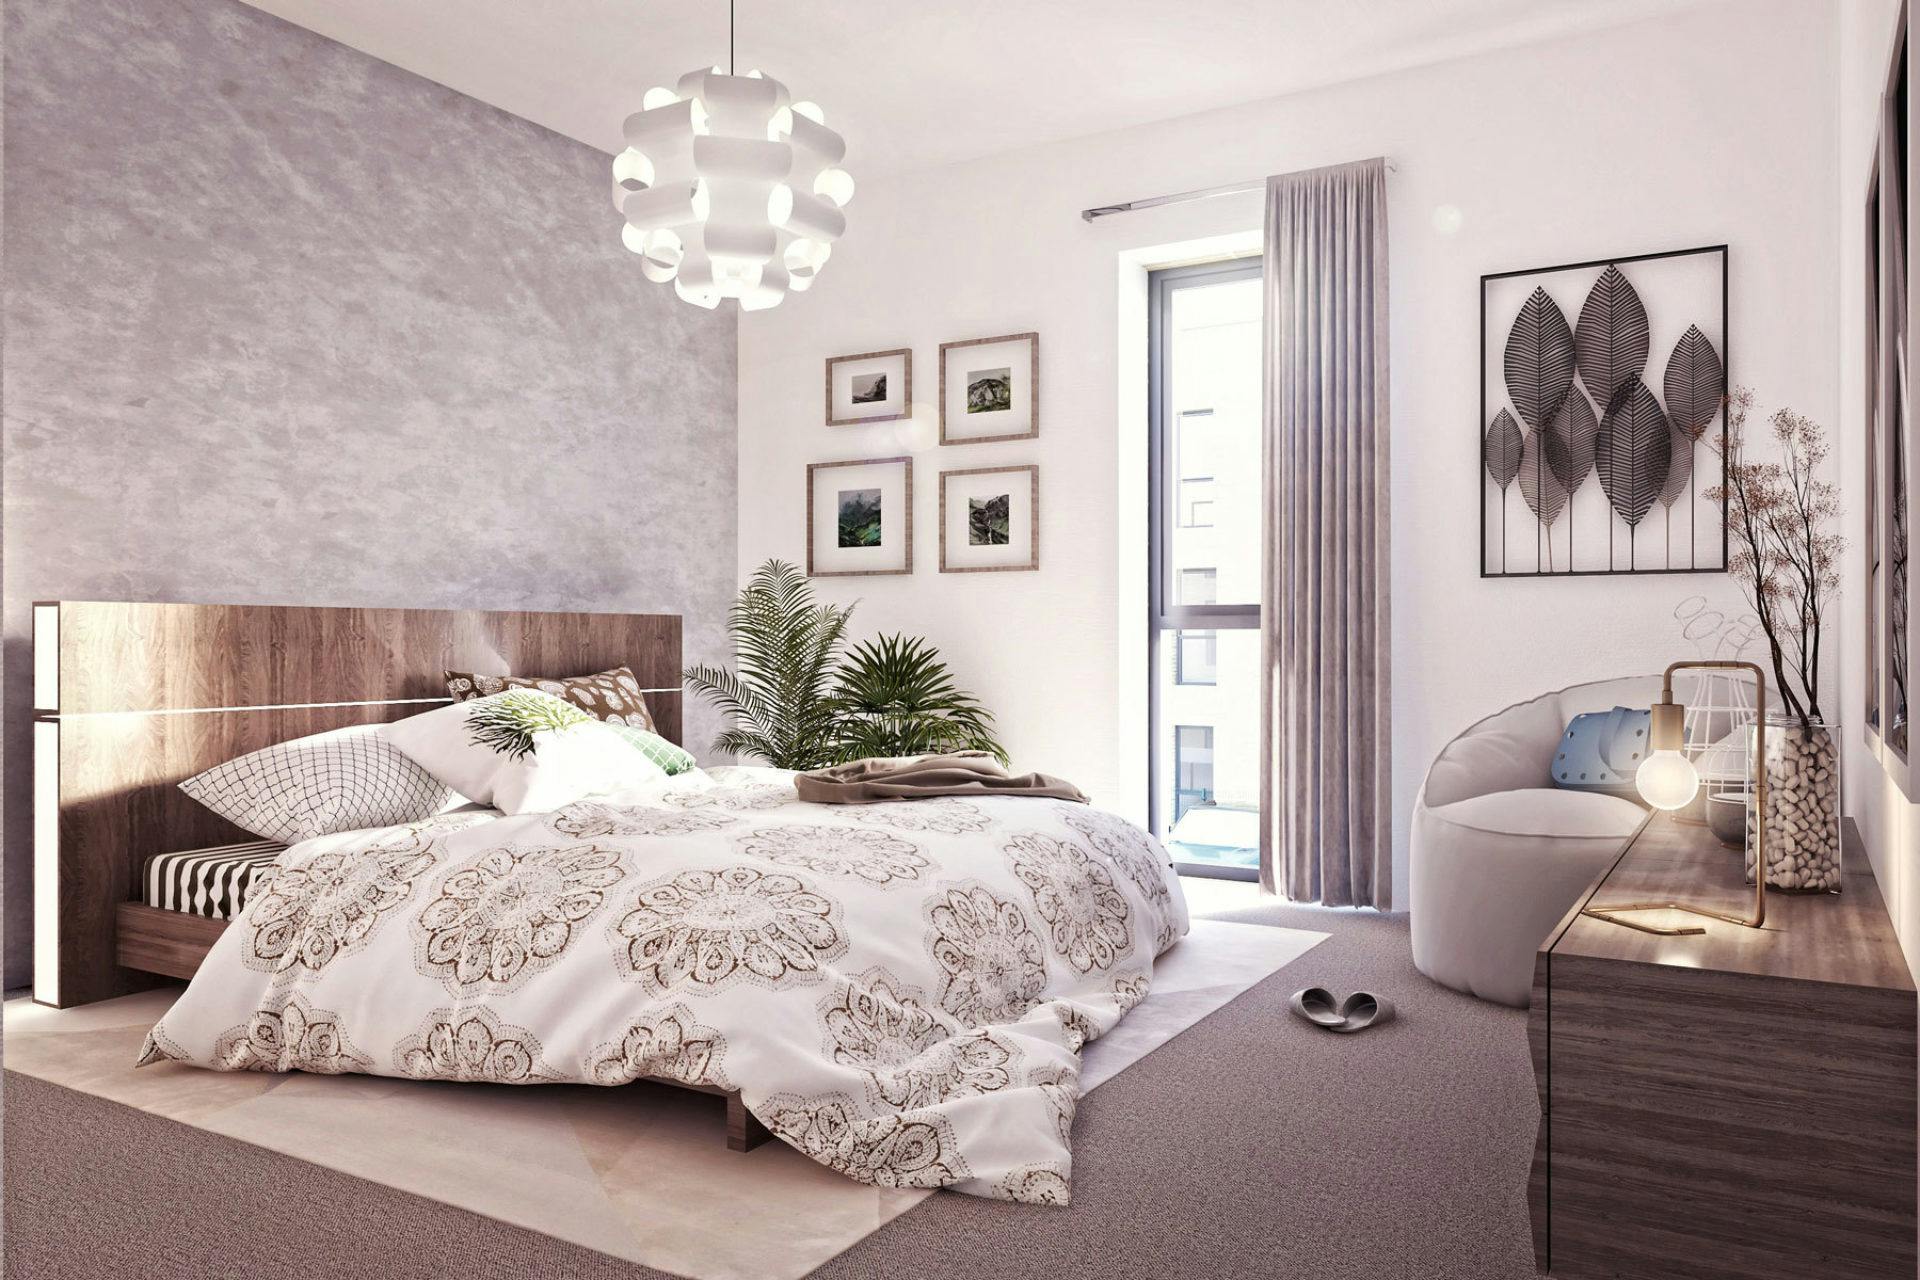 Elegant bedroom with a plush bed, patterned bedding, a modern spherical chandelier, and tasteful wall art.